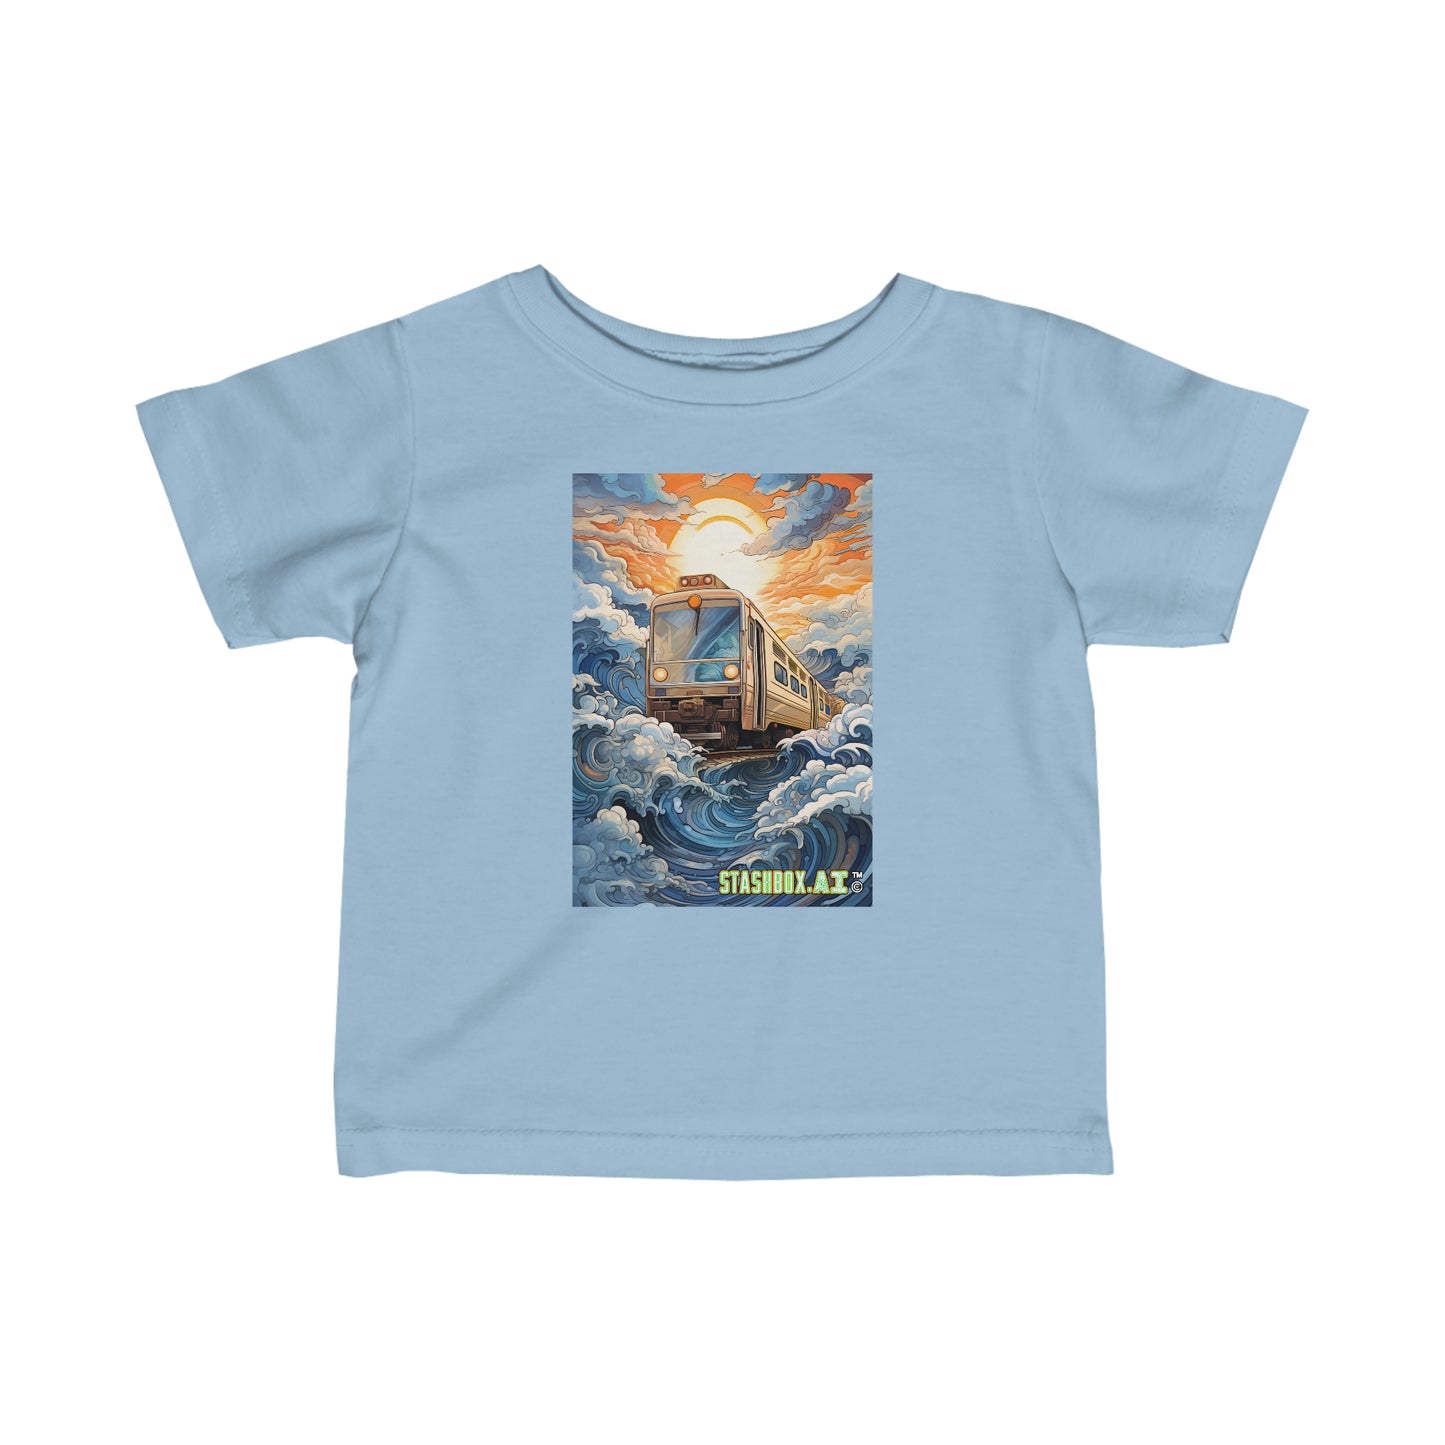 Infant Fine Jersey Tshirt Train plowing through Big Blue Waves and Sunny Bright Cartoon Sky 015